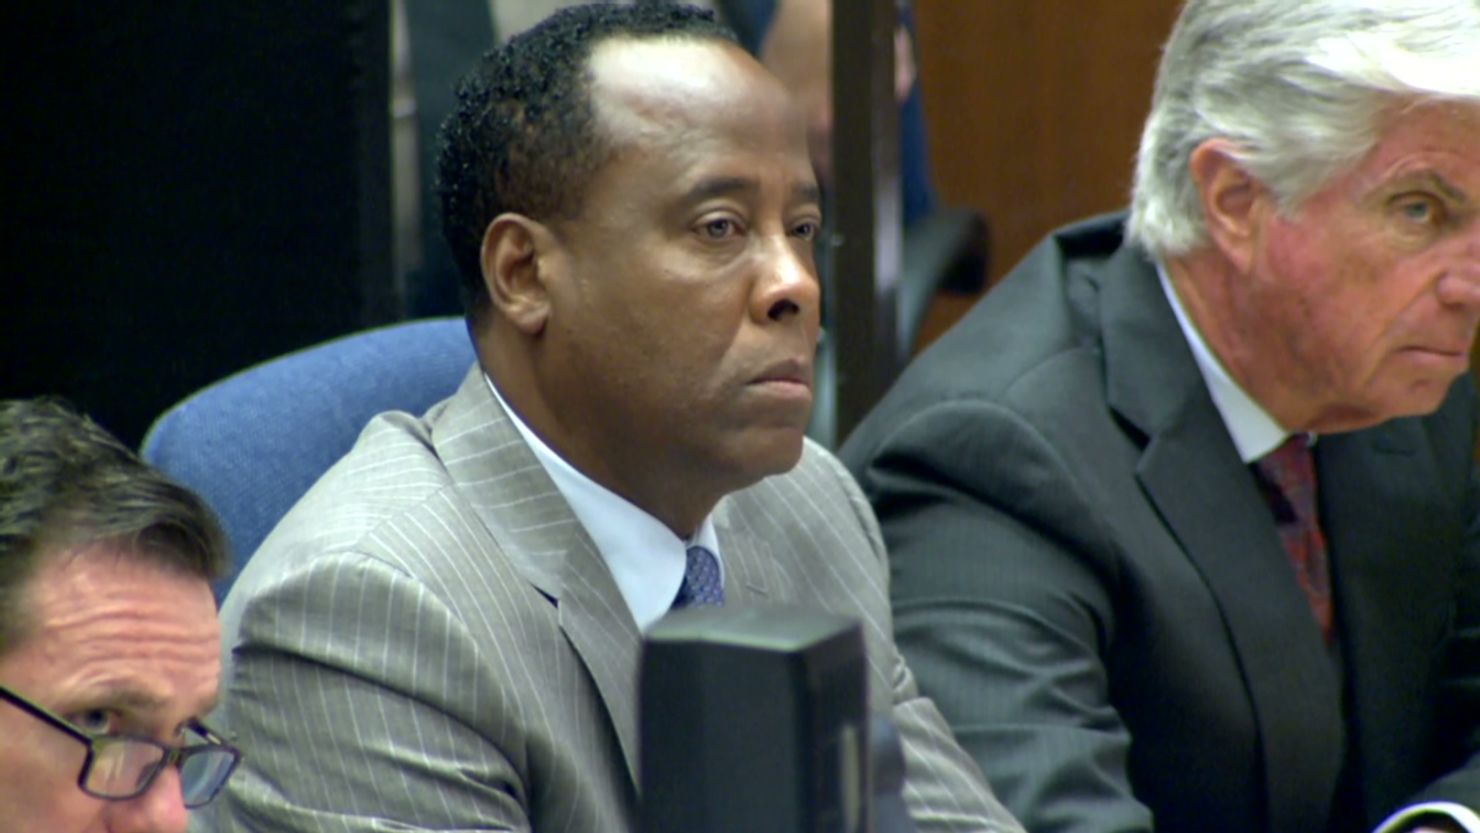 Dr. Conrad Murray's defense team believes Michael Jackson may have injected himself with a fatal dose of the surgical anesthetic propofol.